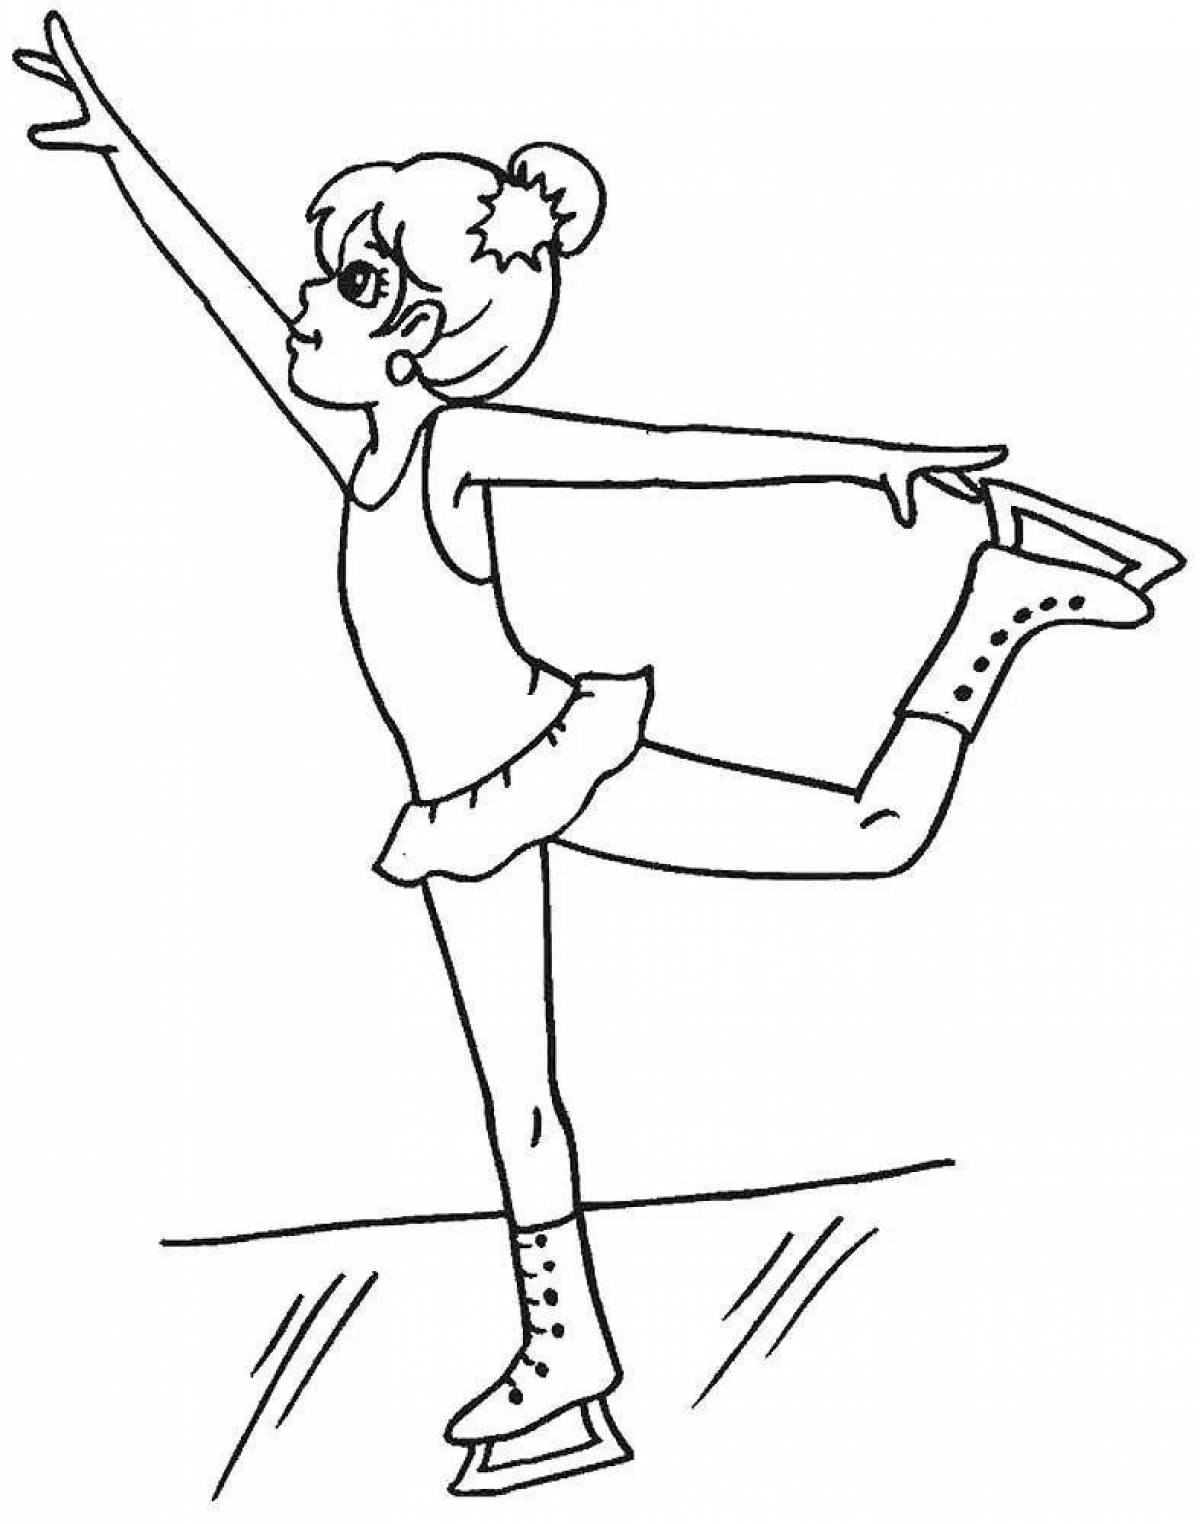 Refreshing figure skater coloring page for kids